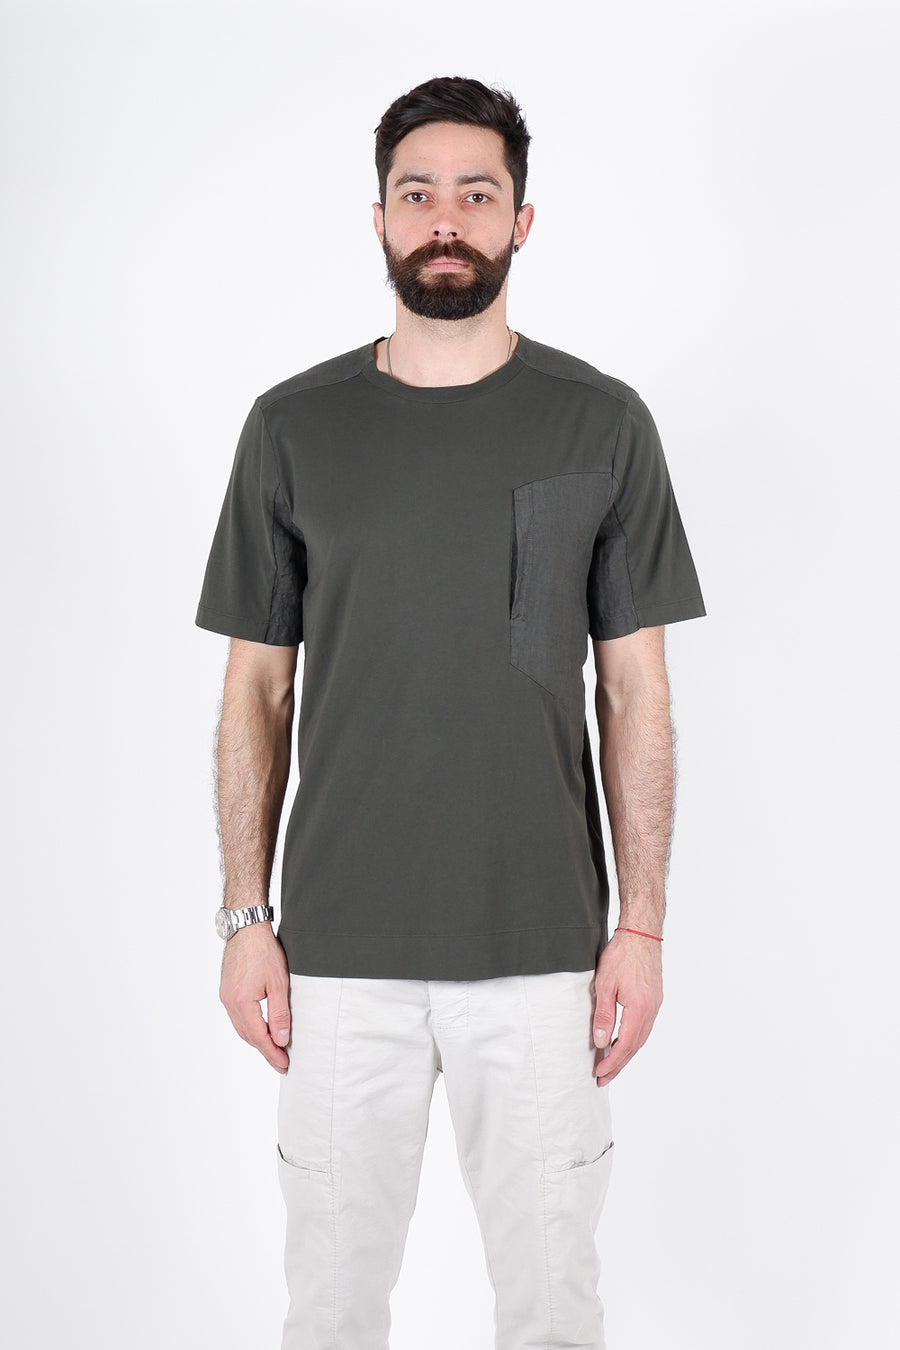 Buy the Transit Cotton Jersey T-Shirt W/ Linen Inserts in Green at Intro. Spend £50 for free UK delivery. Official stockists. We ship worldwide.